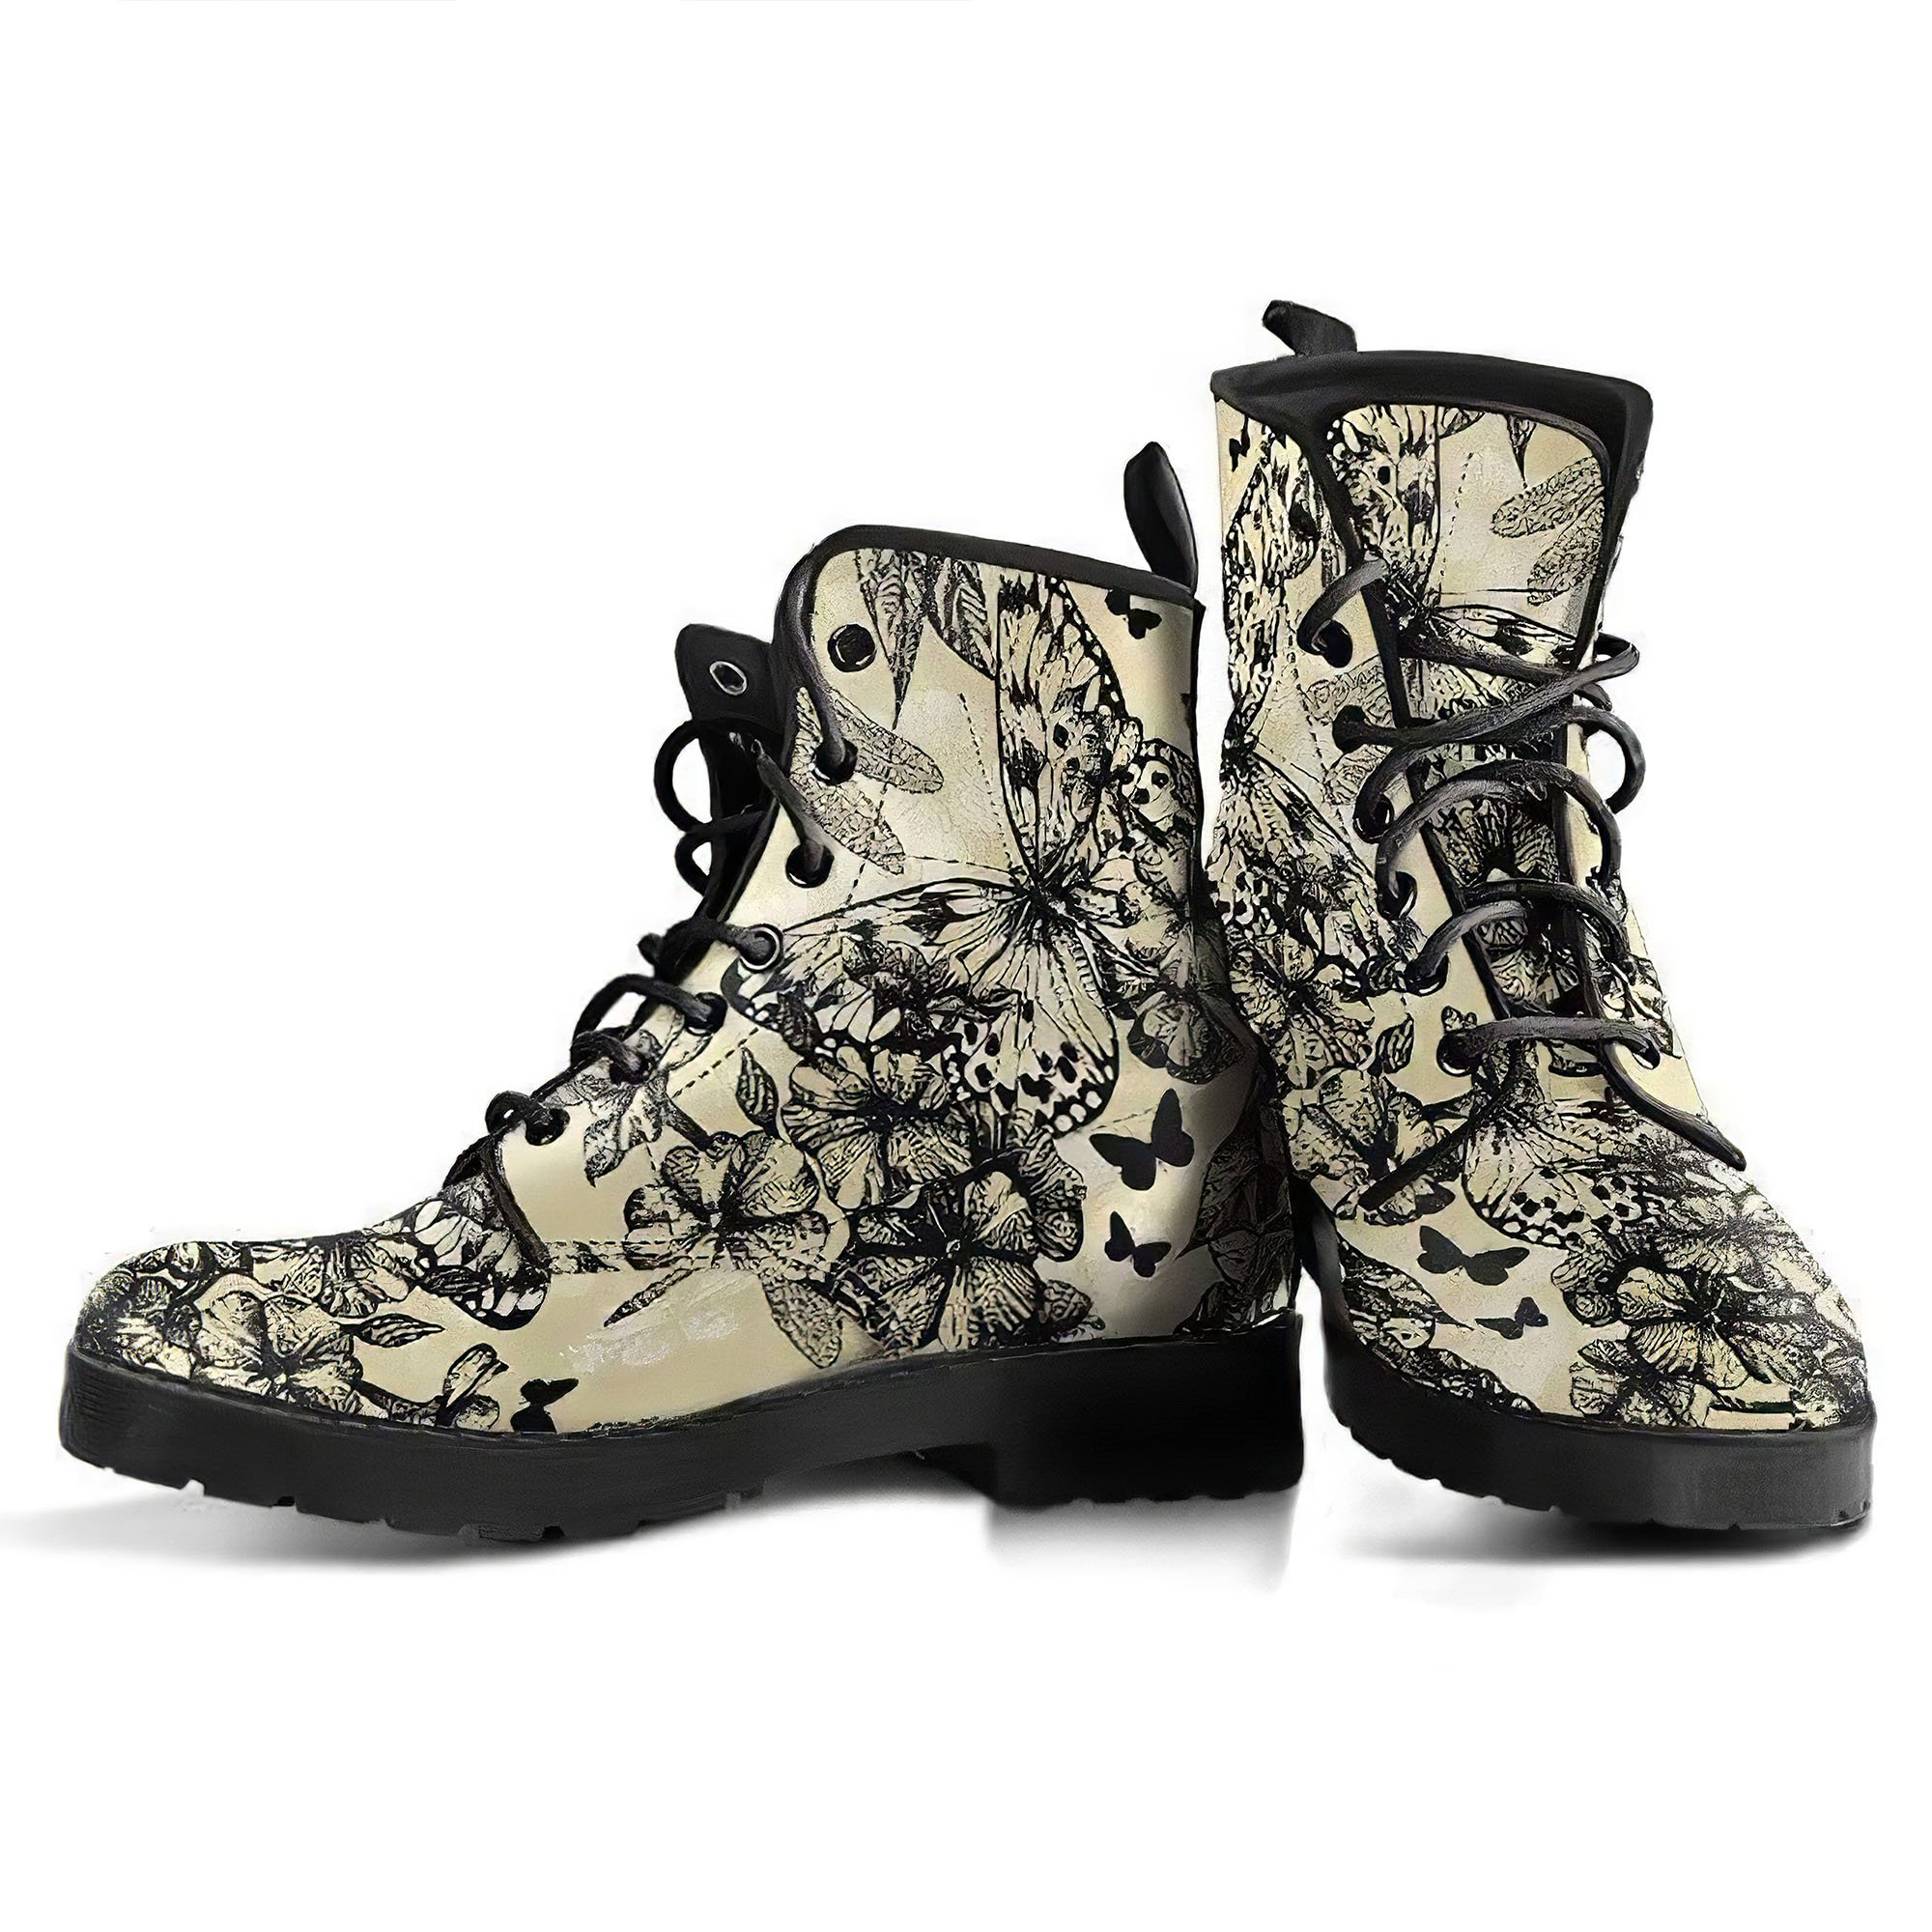 butterfly-pattern-handcrafted-boots-gp-main.jpg